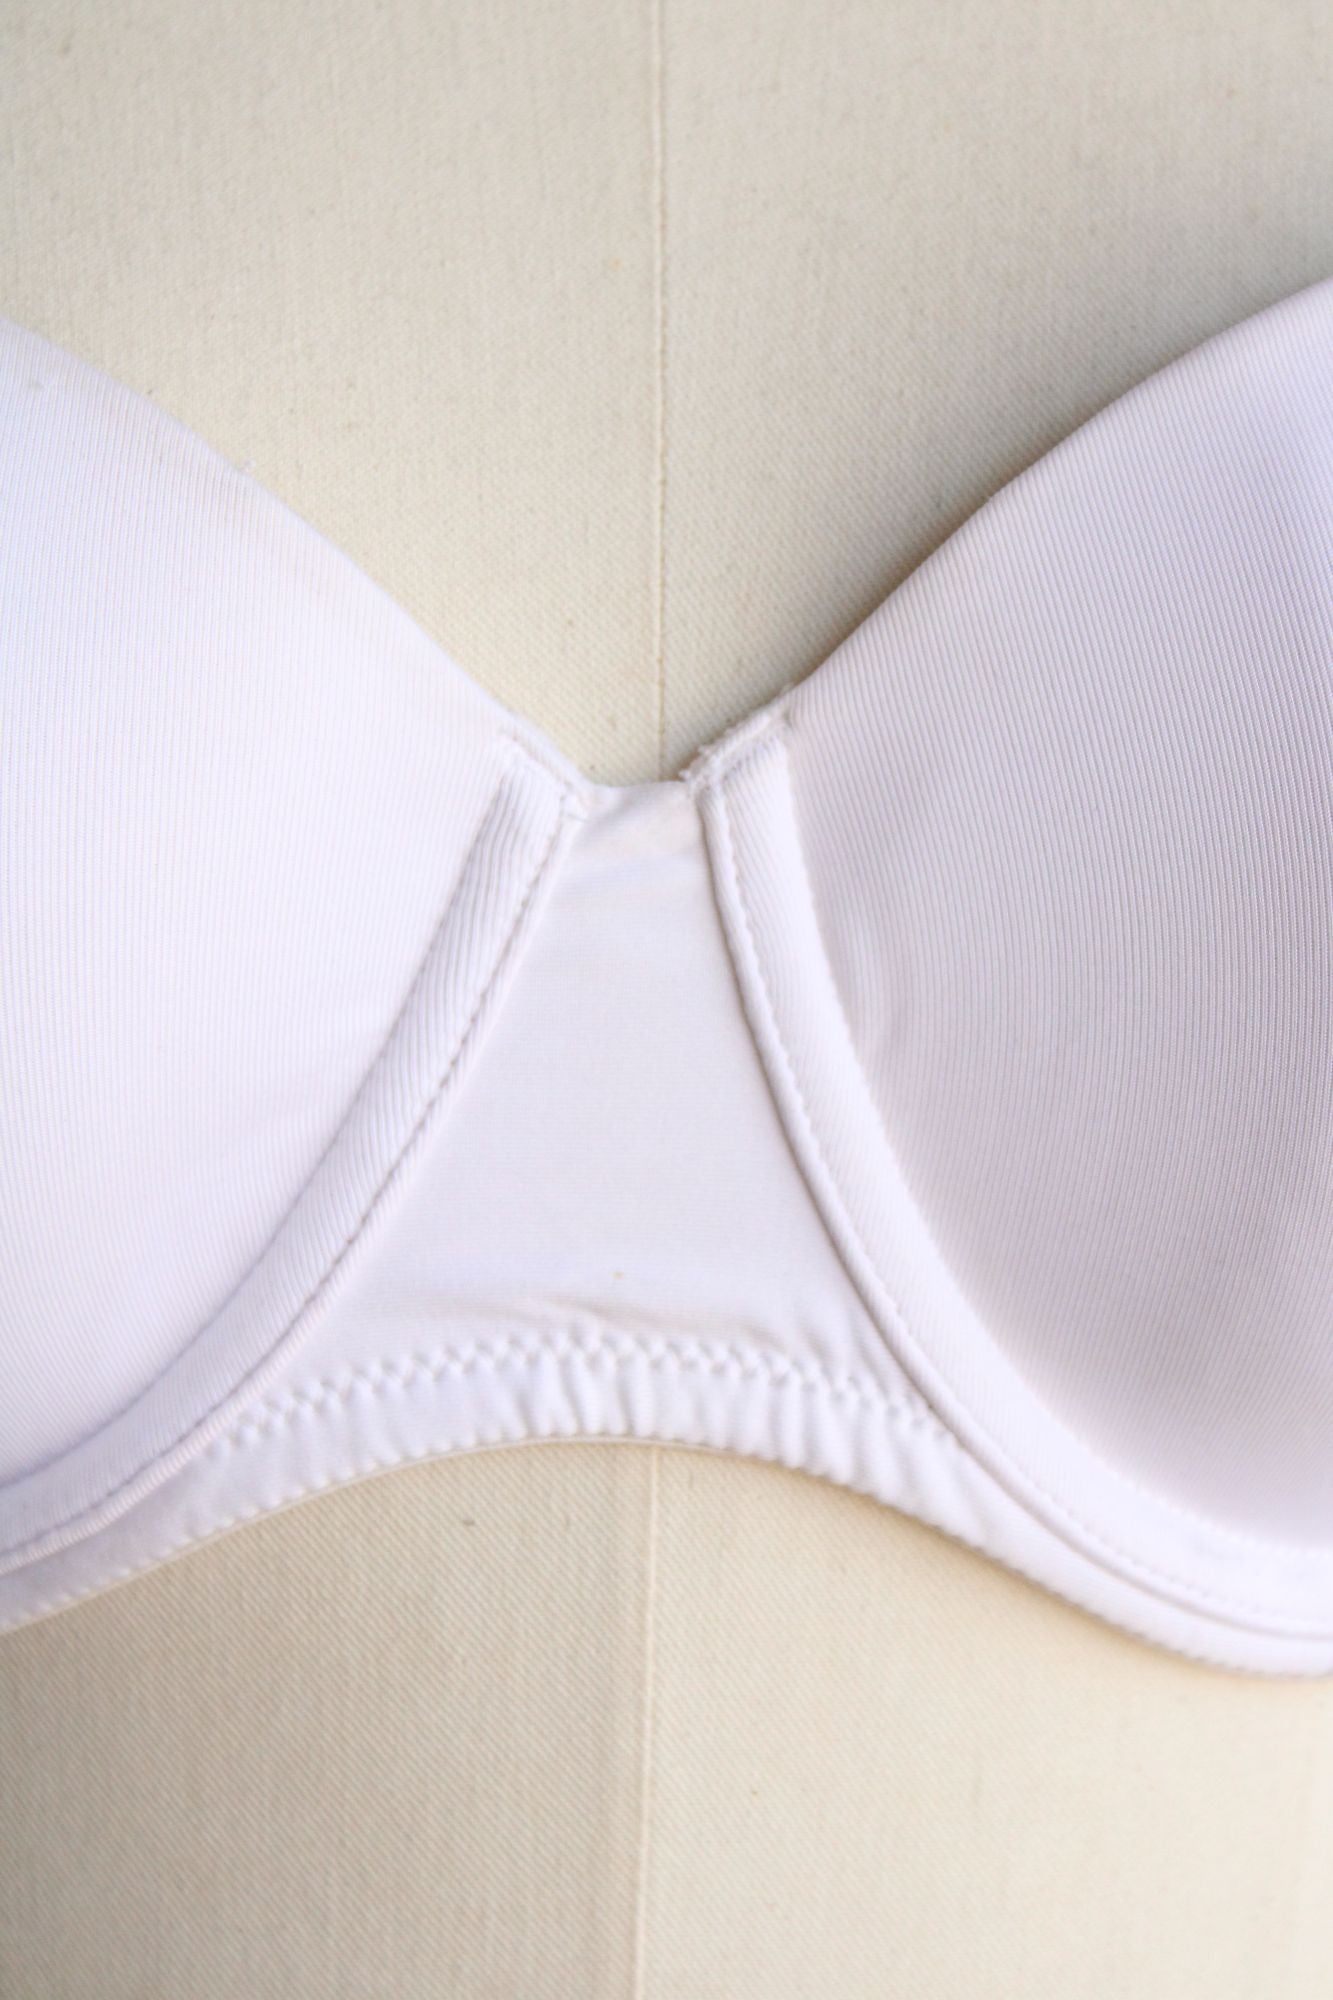 Vintage 1980s 1990s Bra, White 36B, Warners Lace Charmers, No